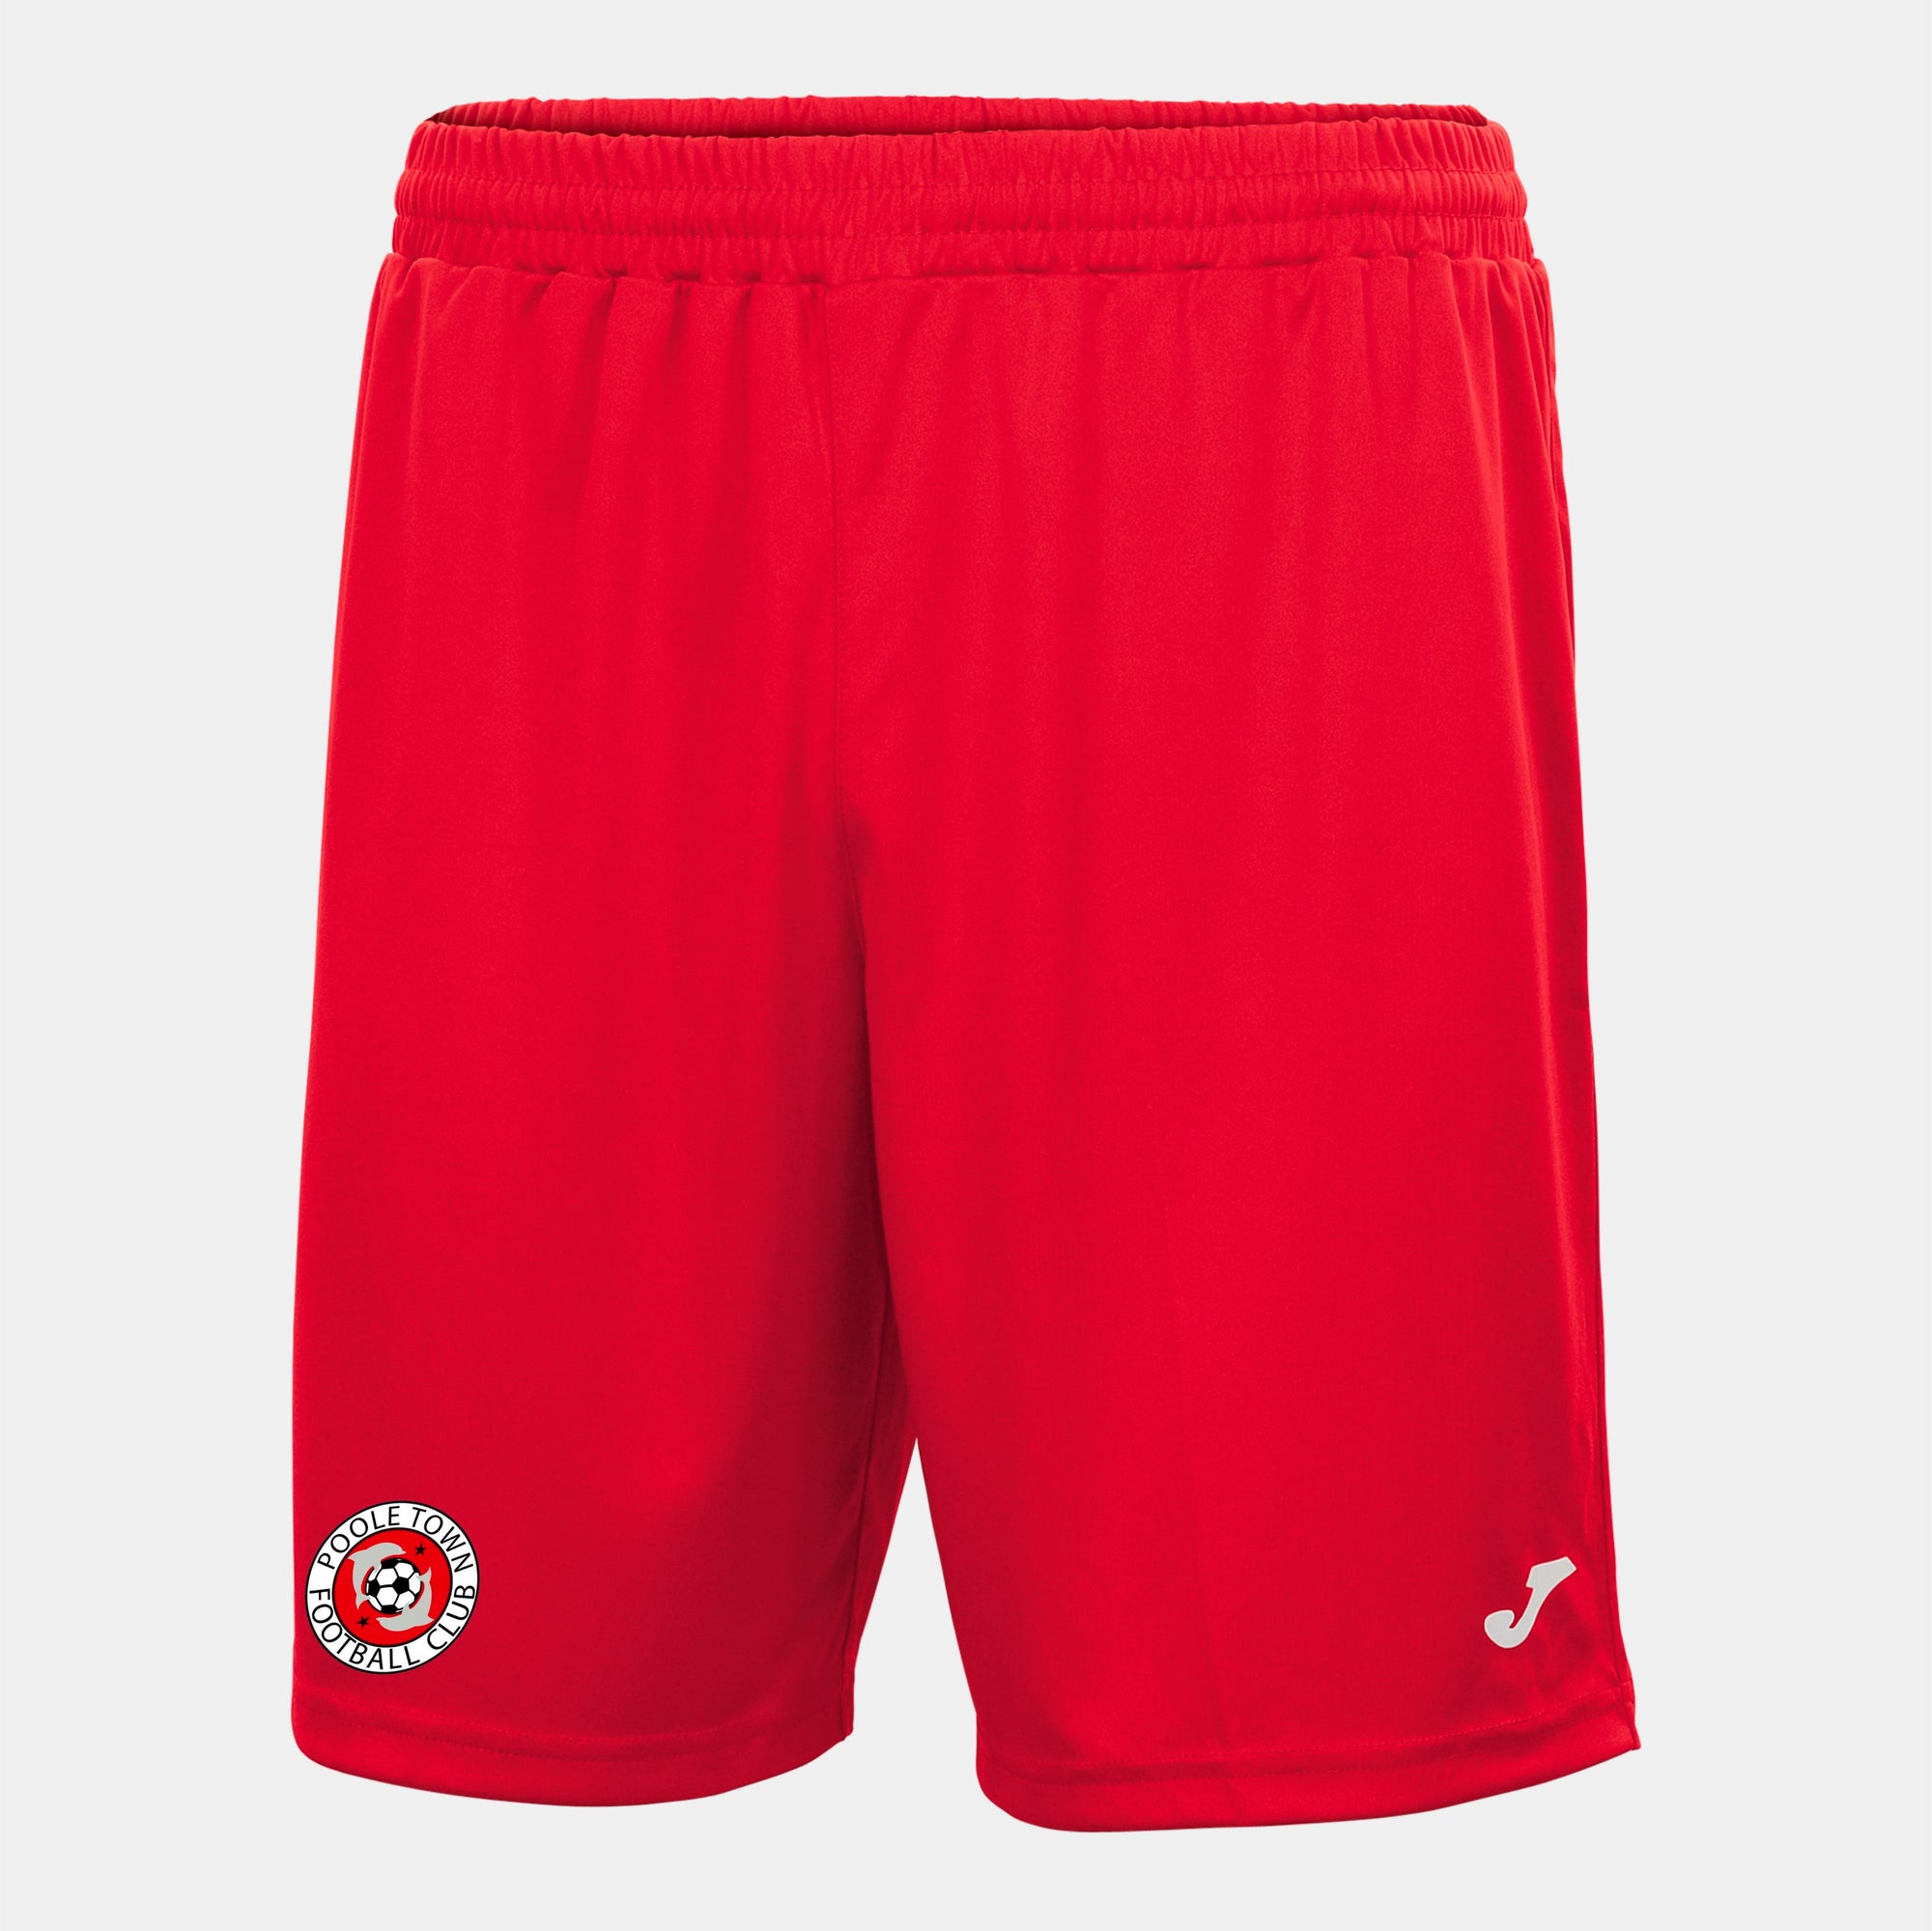 Poole Town Wessex - Joma Nobel Short - Red